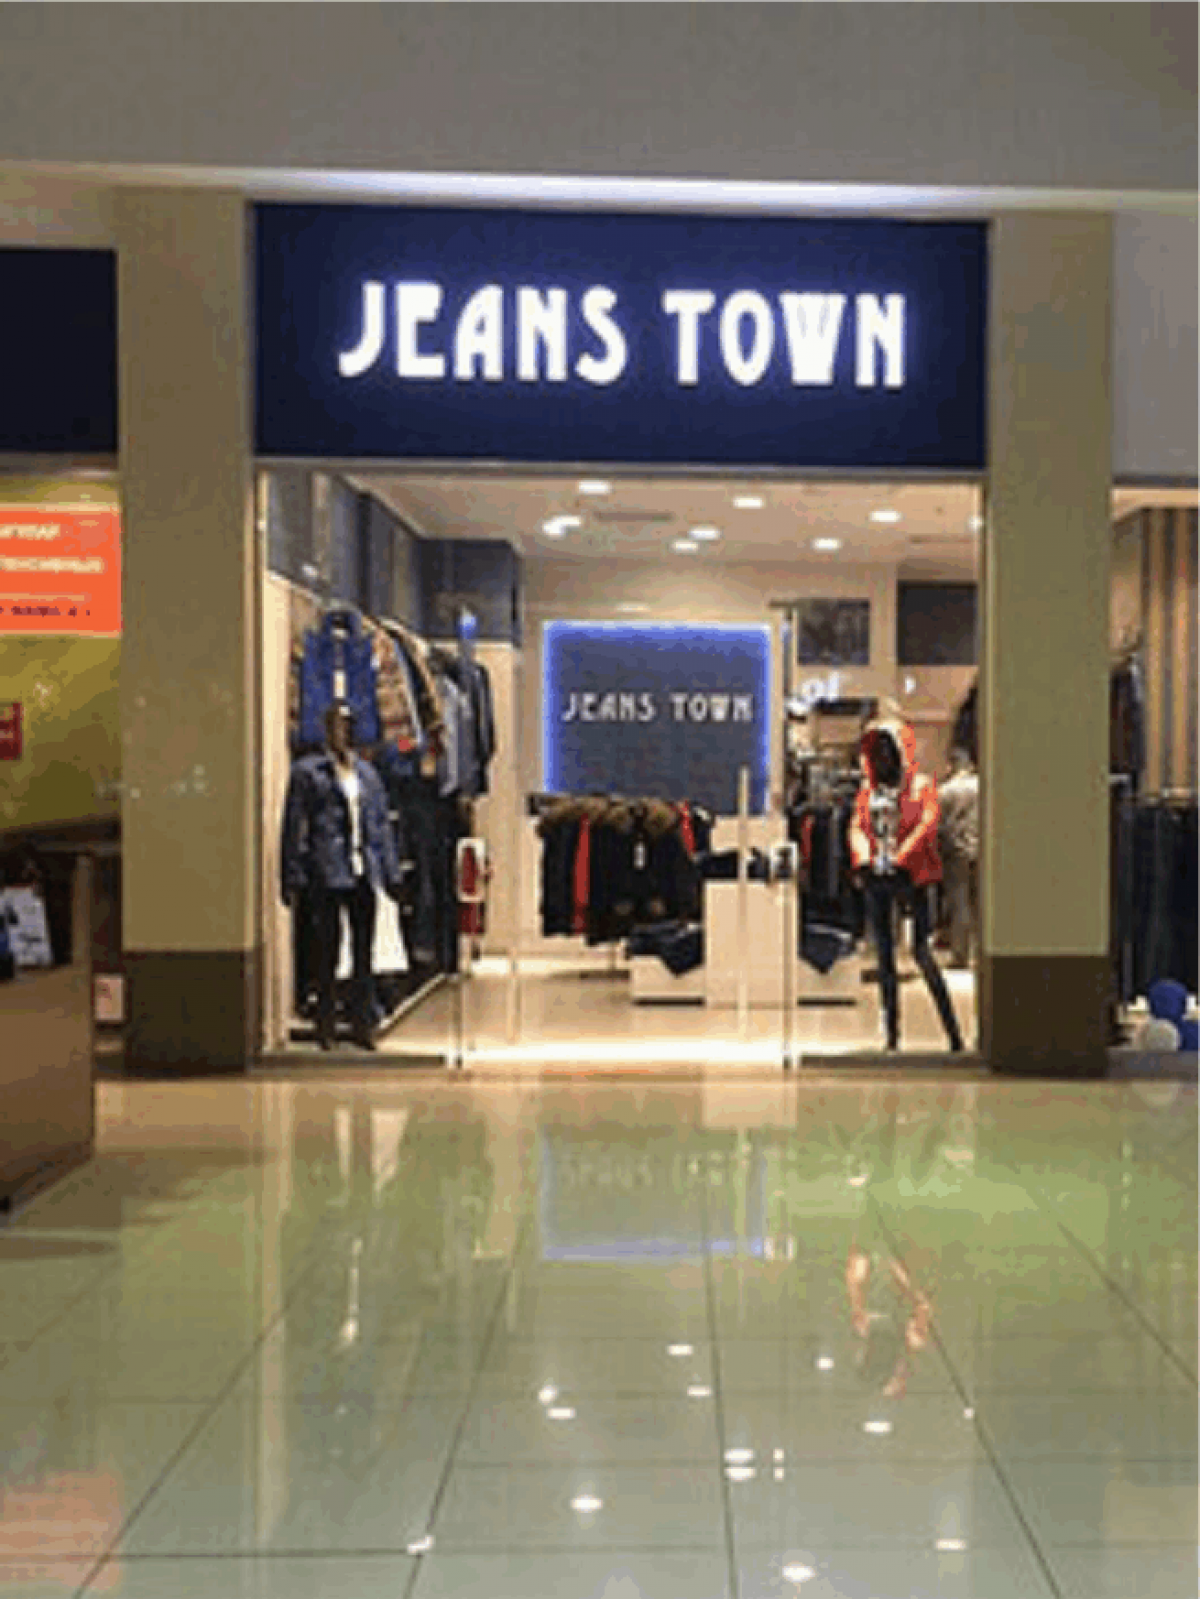 Jeans town